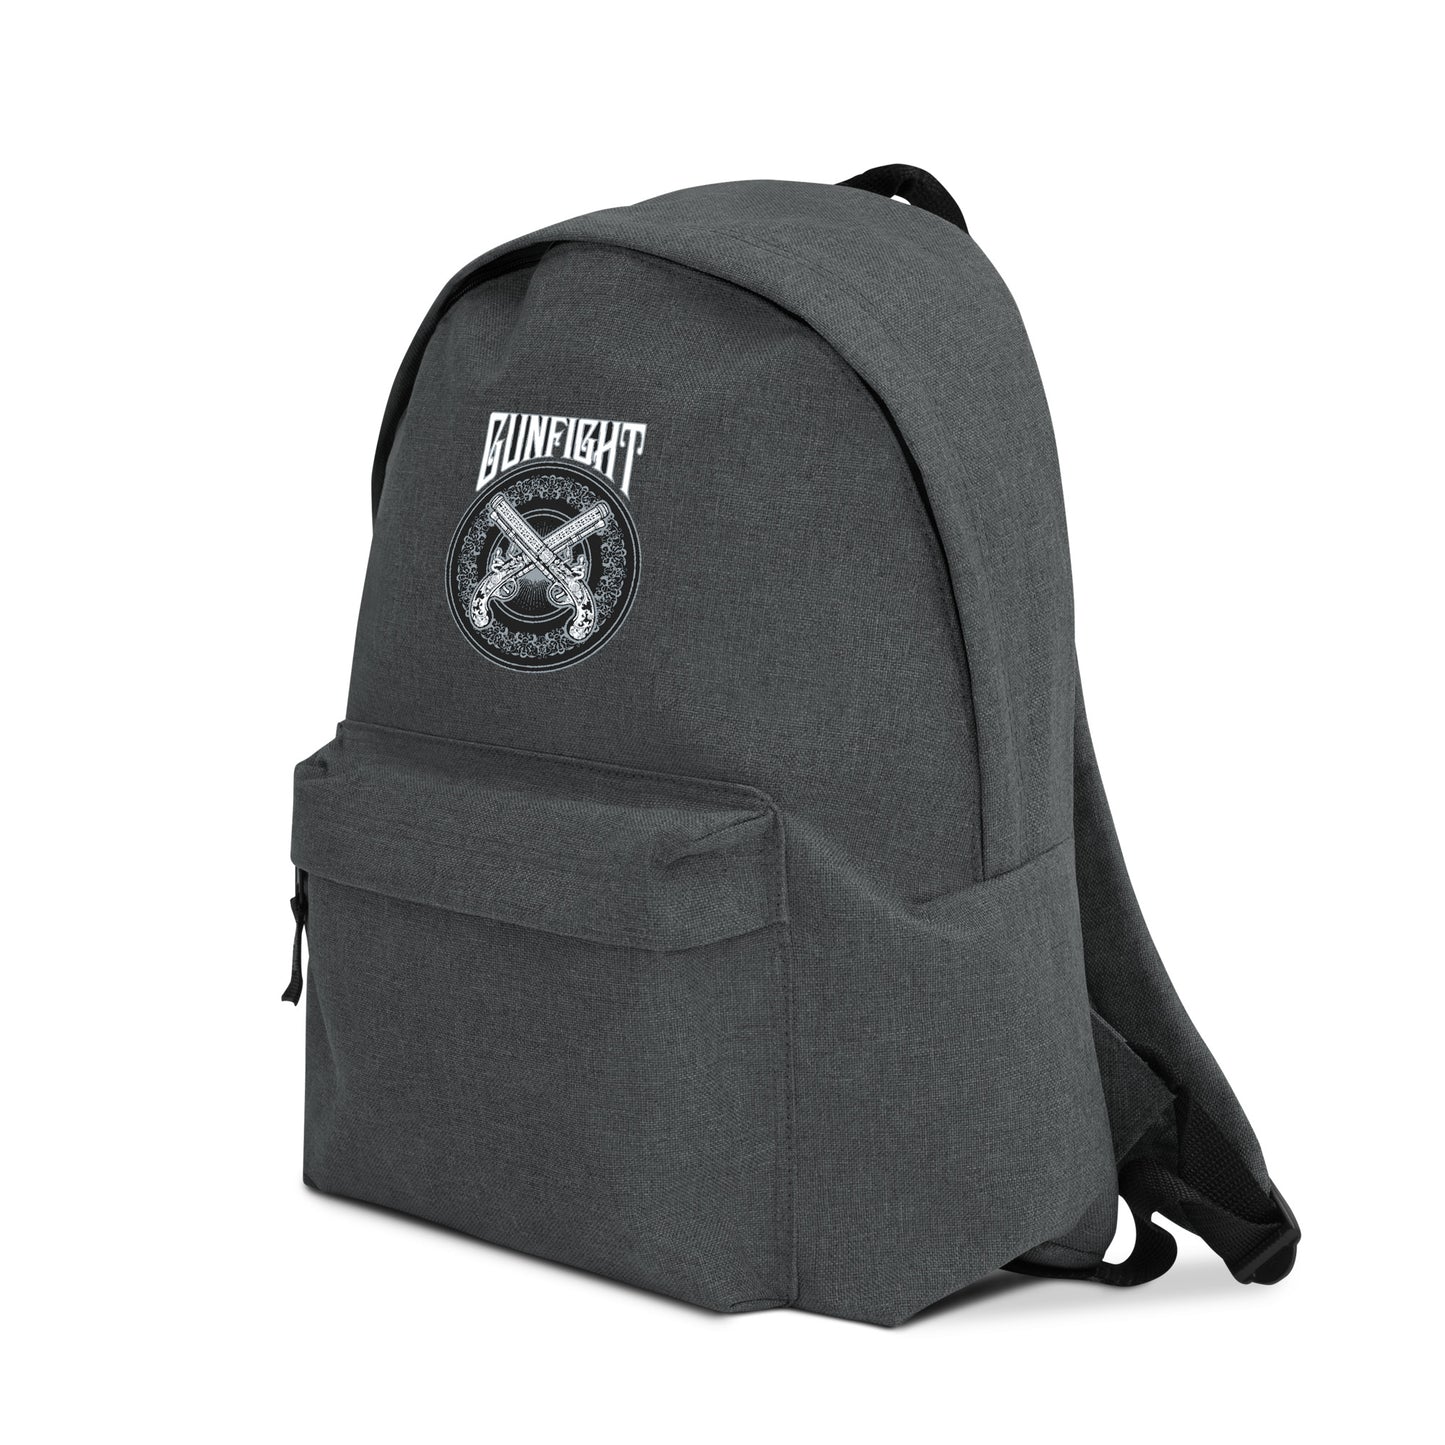 GunFight Embroidered Backpack